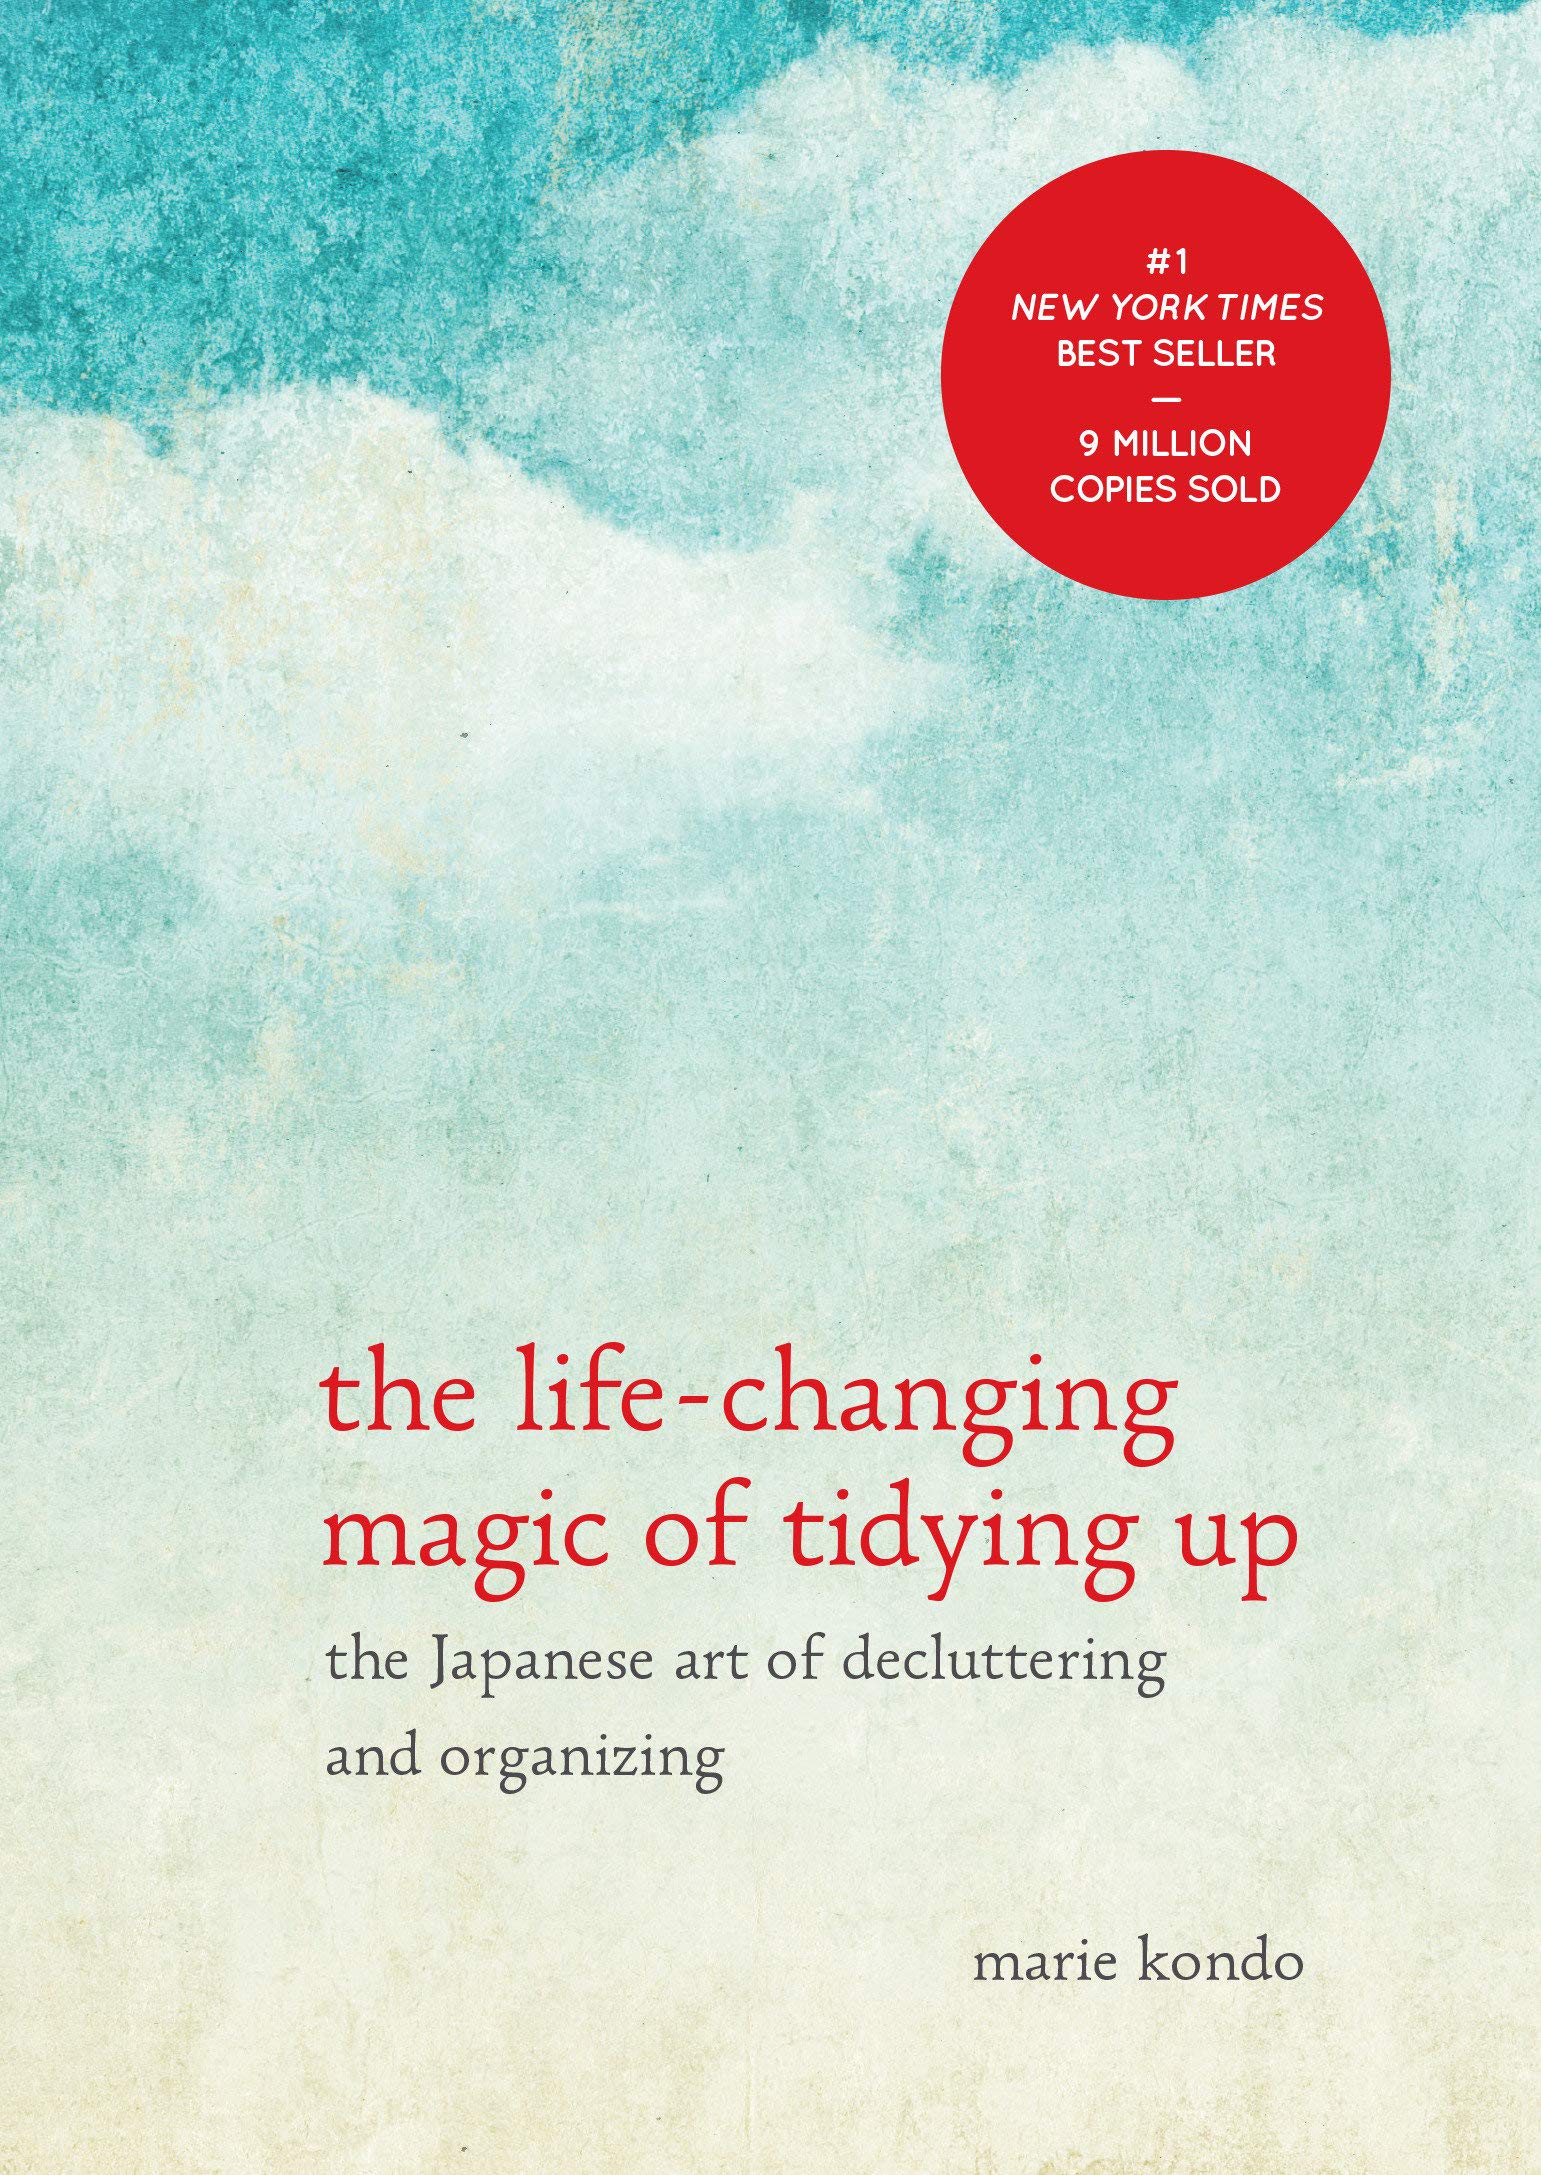 Cover of "The Life-Changing Magic of Tidying Up" by Marie Kondo 